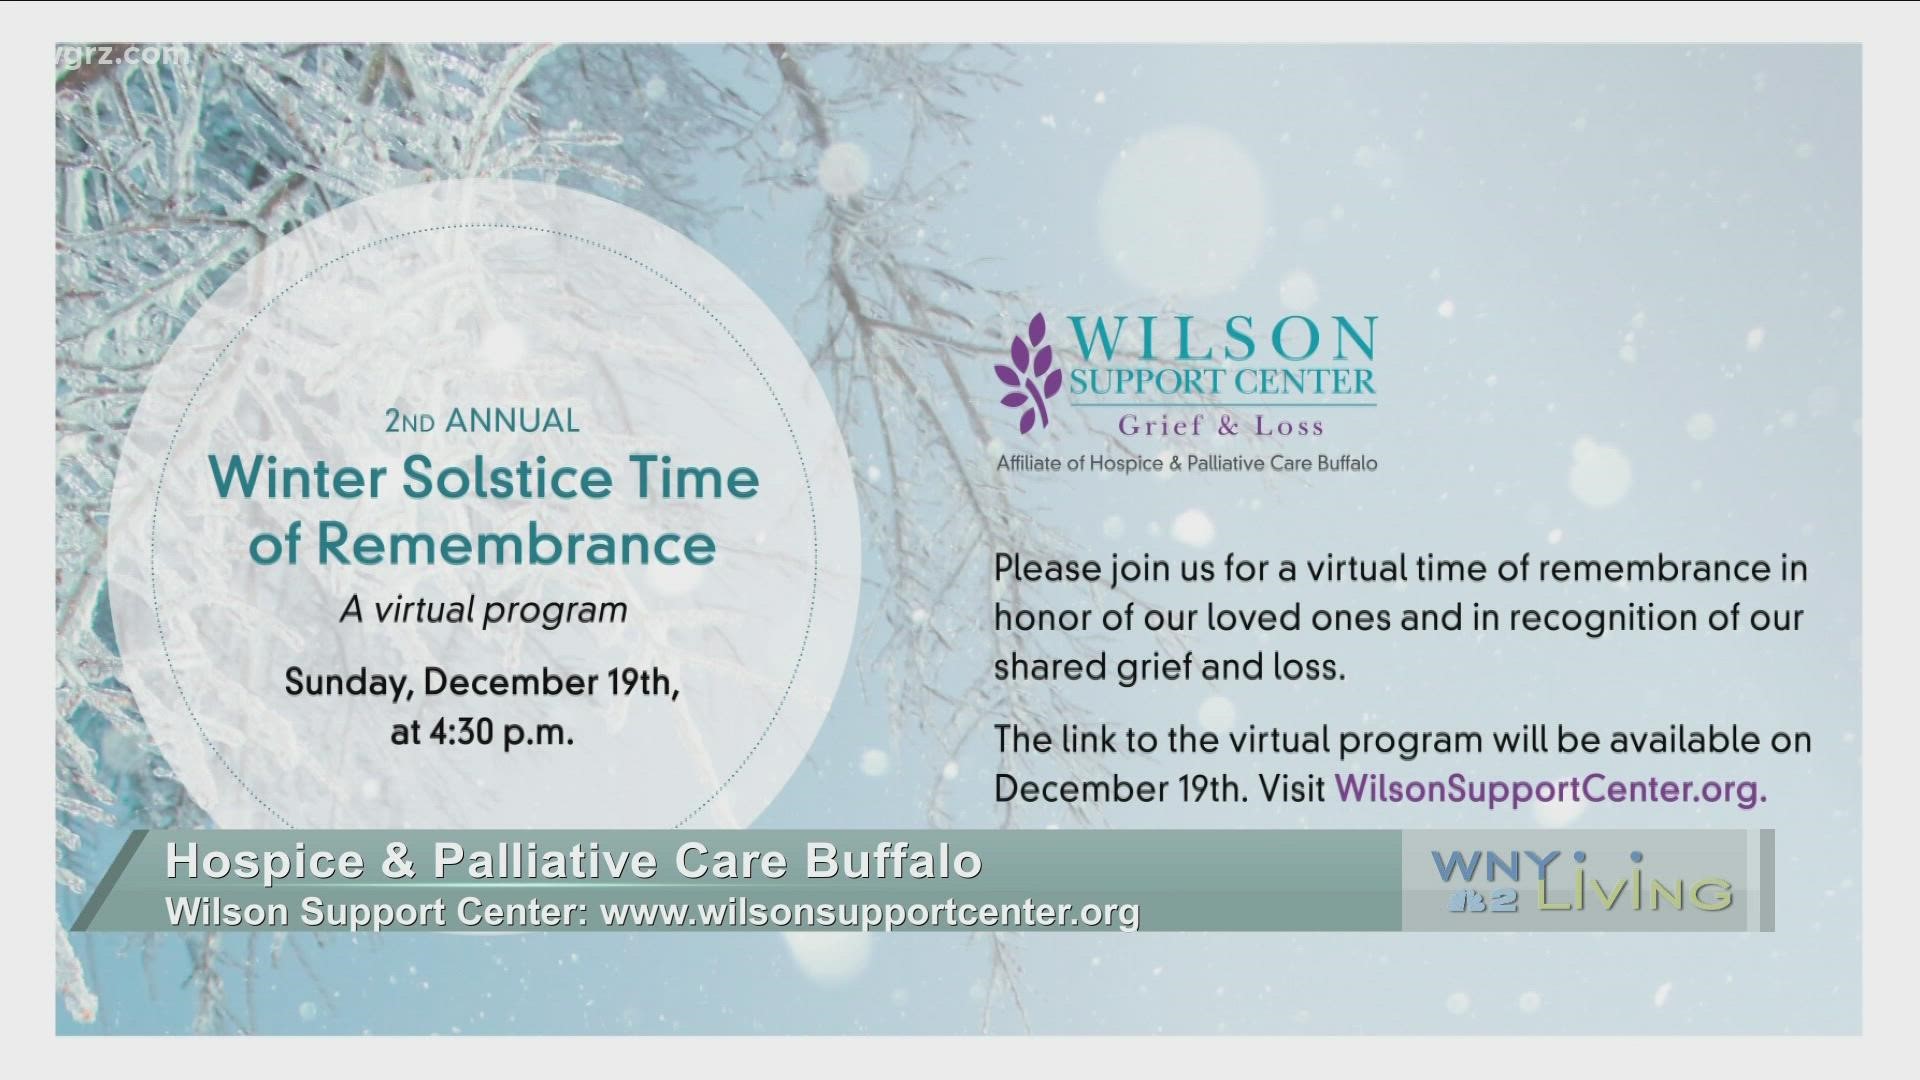 WNY Living - December 4 - Hospice & Palliative Care Buffalo (THIS VIDEO IS SPONSORED BY HOSPICE & PALLIATIVE CARE BUFFALO)